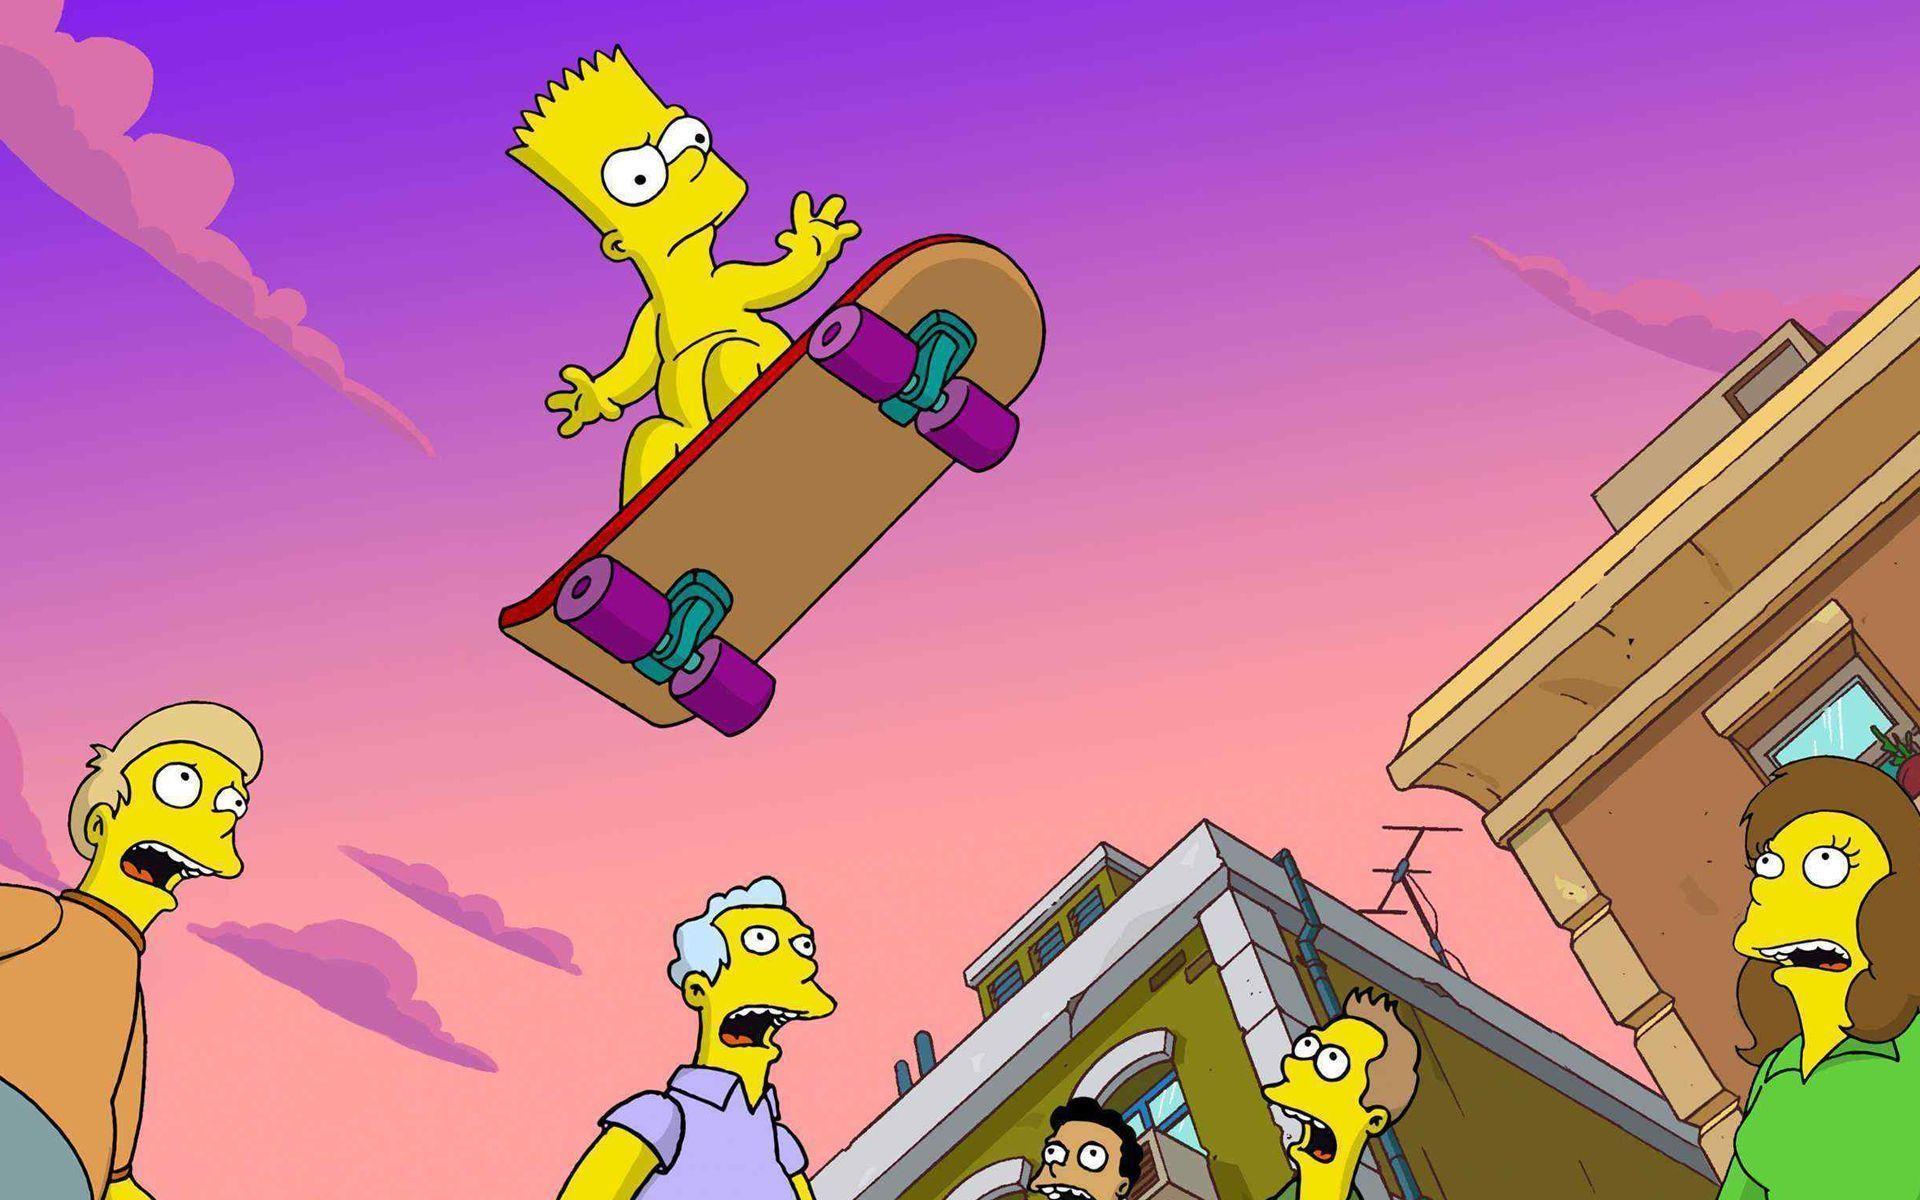 The Simpsons Movie Wallpapers